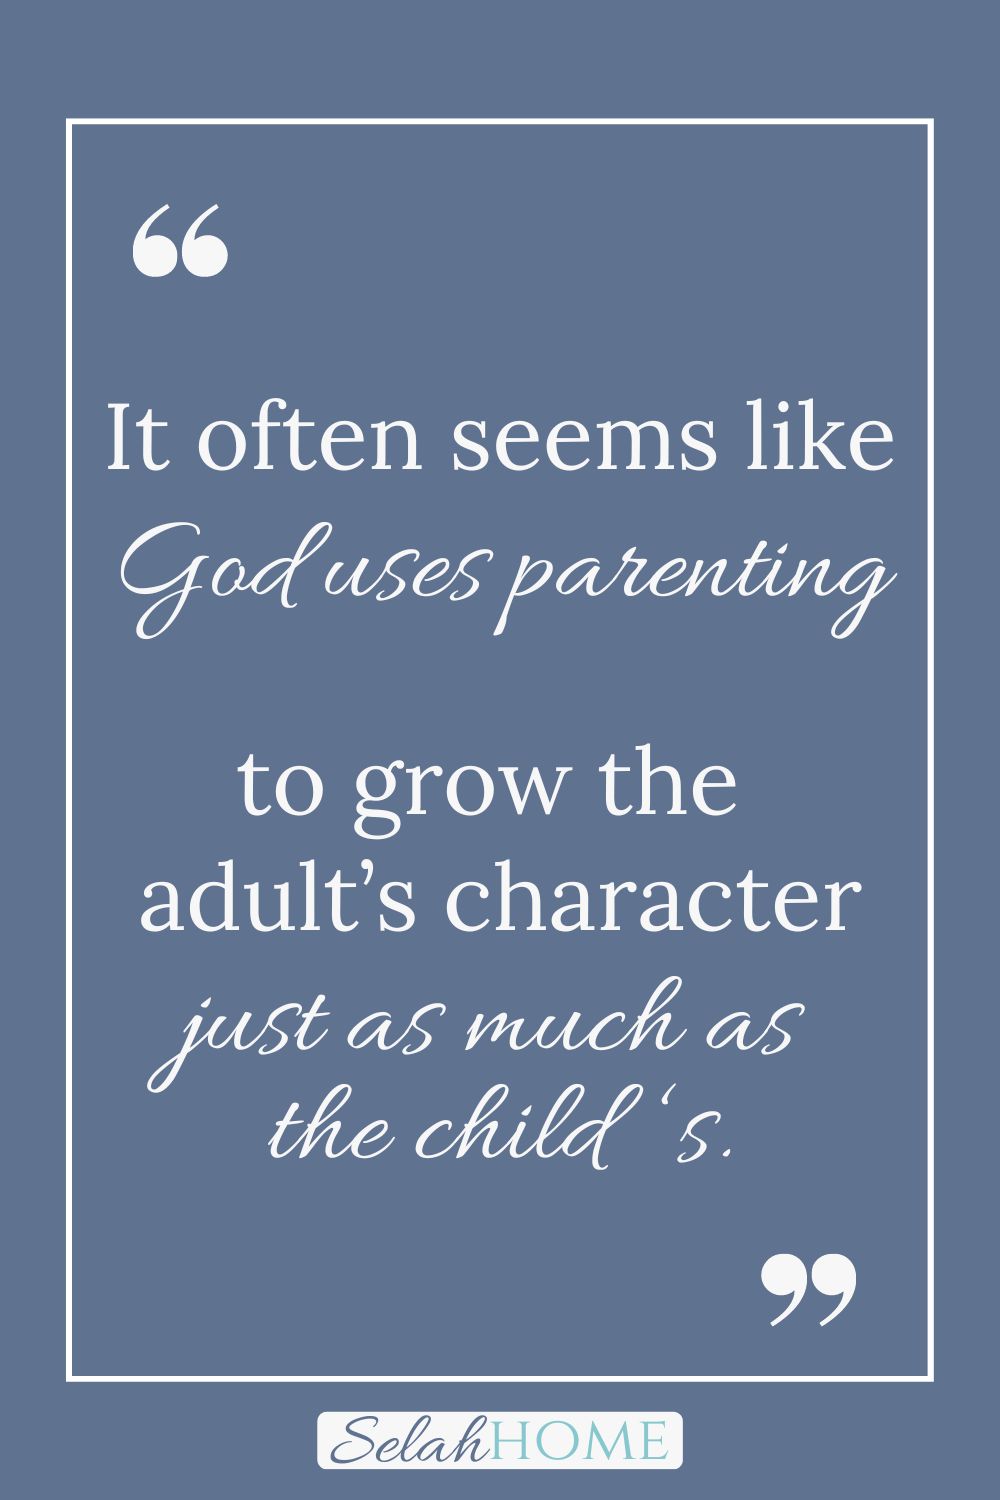 A quote for this post about parenting choices that reads, "It often seems like God uses parenting to grow the adult's character just as much as the child's."